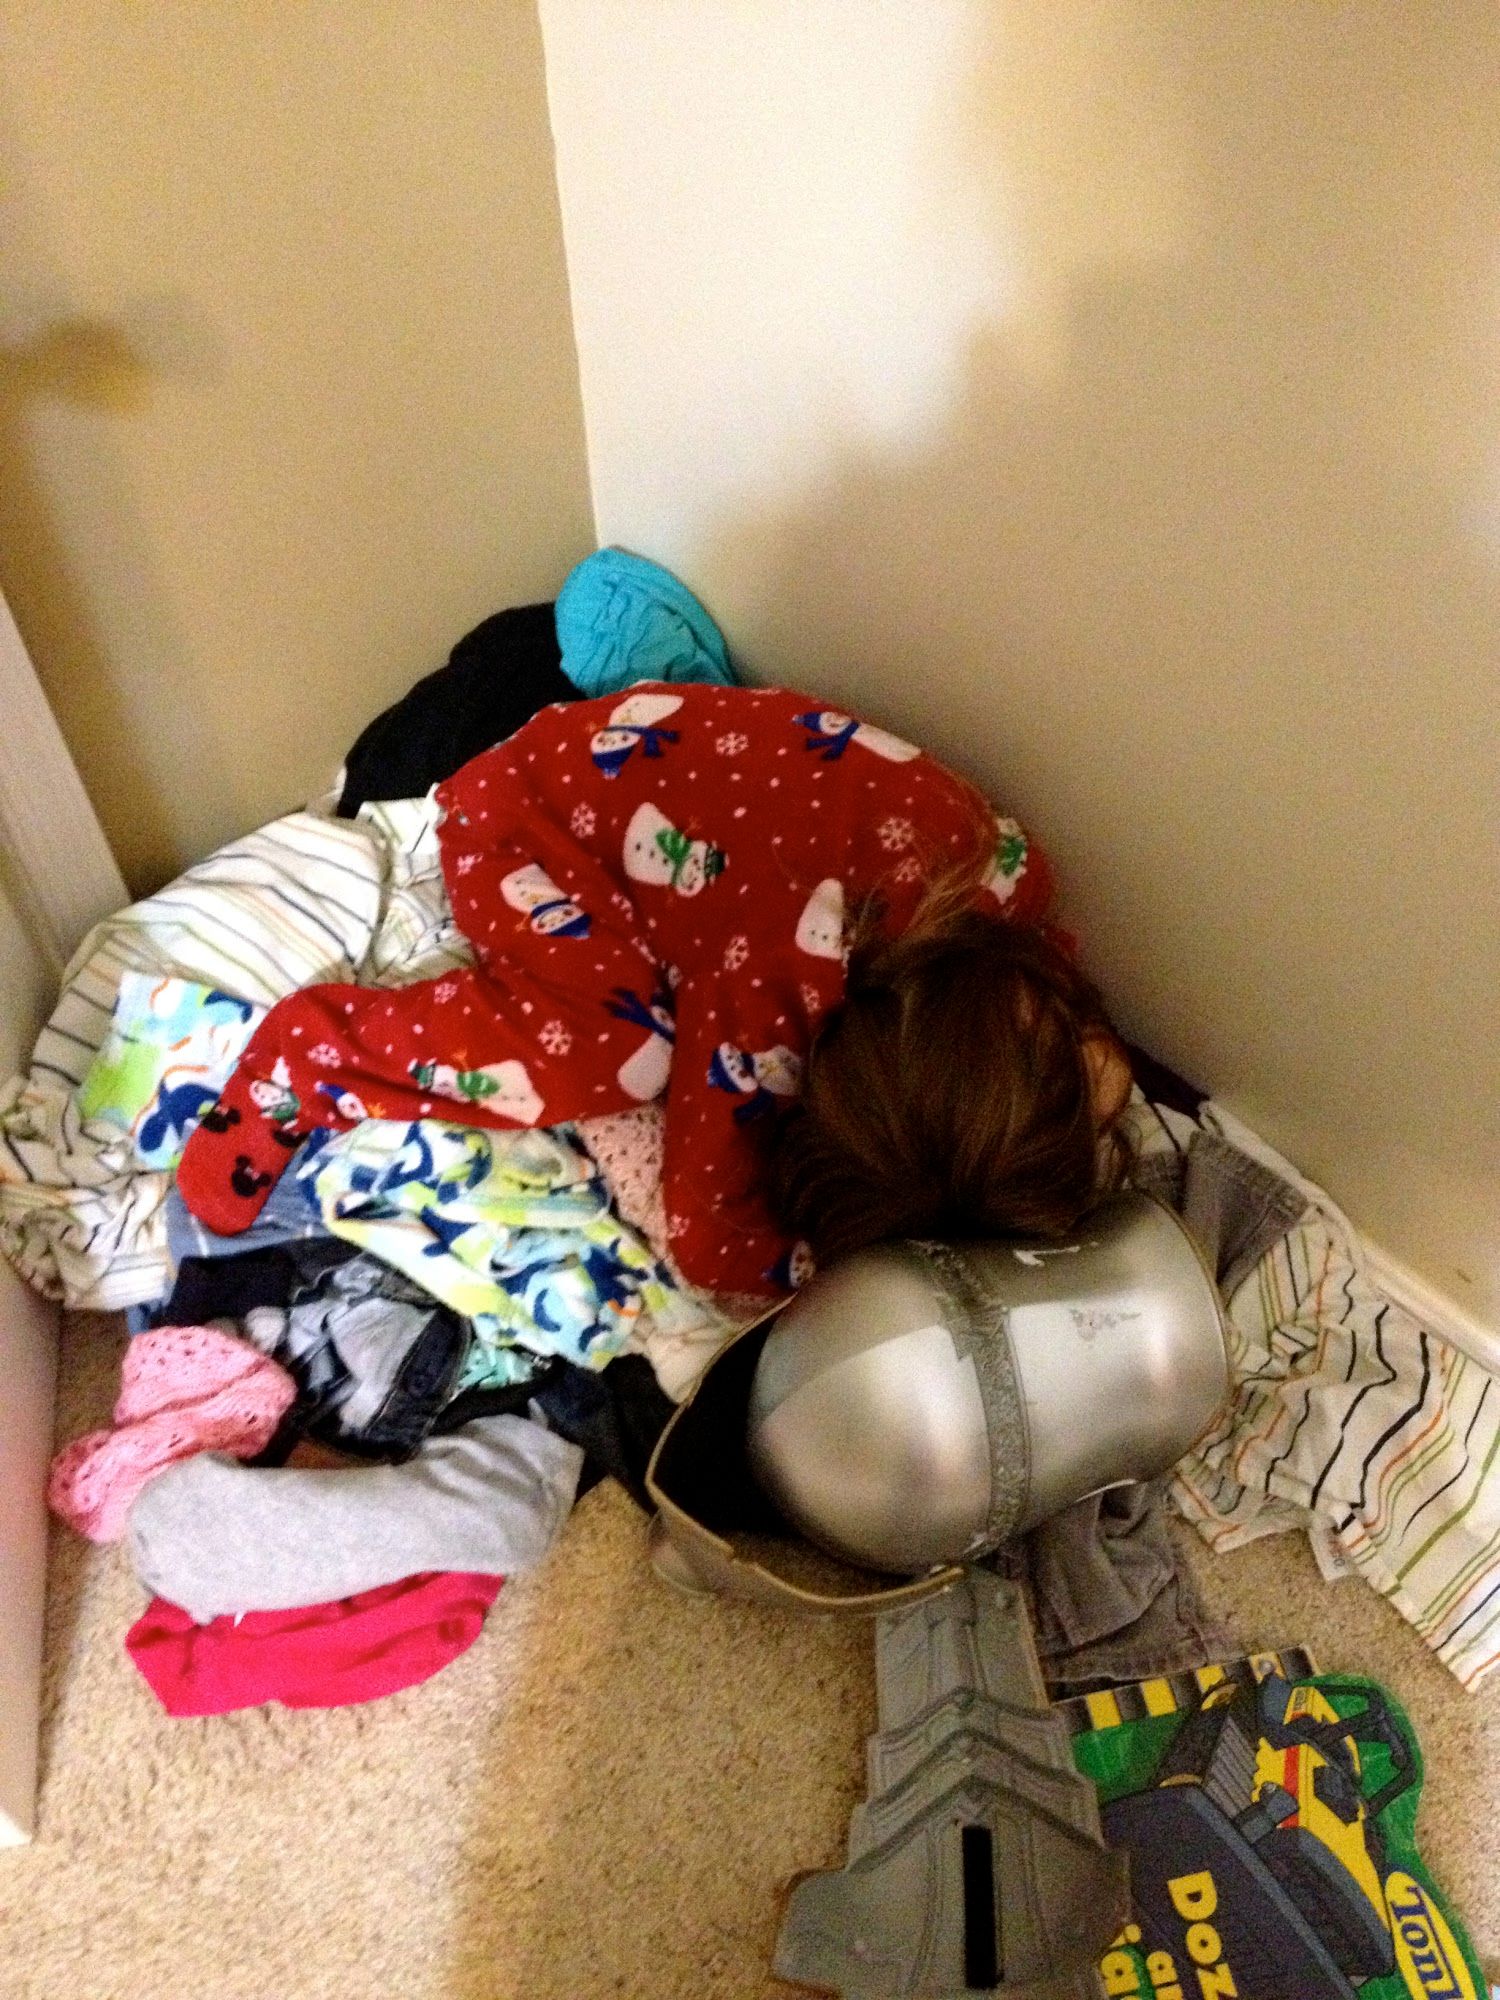  After a fun night of trick or treating I found her sound asleep on our laundry pile in our room.Yeah, that's right our dirty laundry pile. Sigh and gross. 